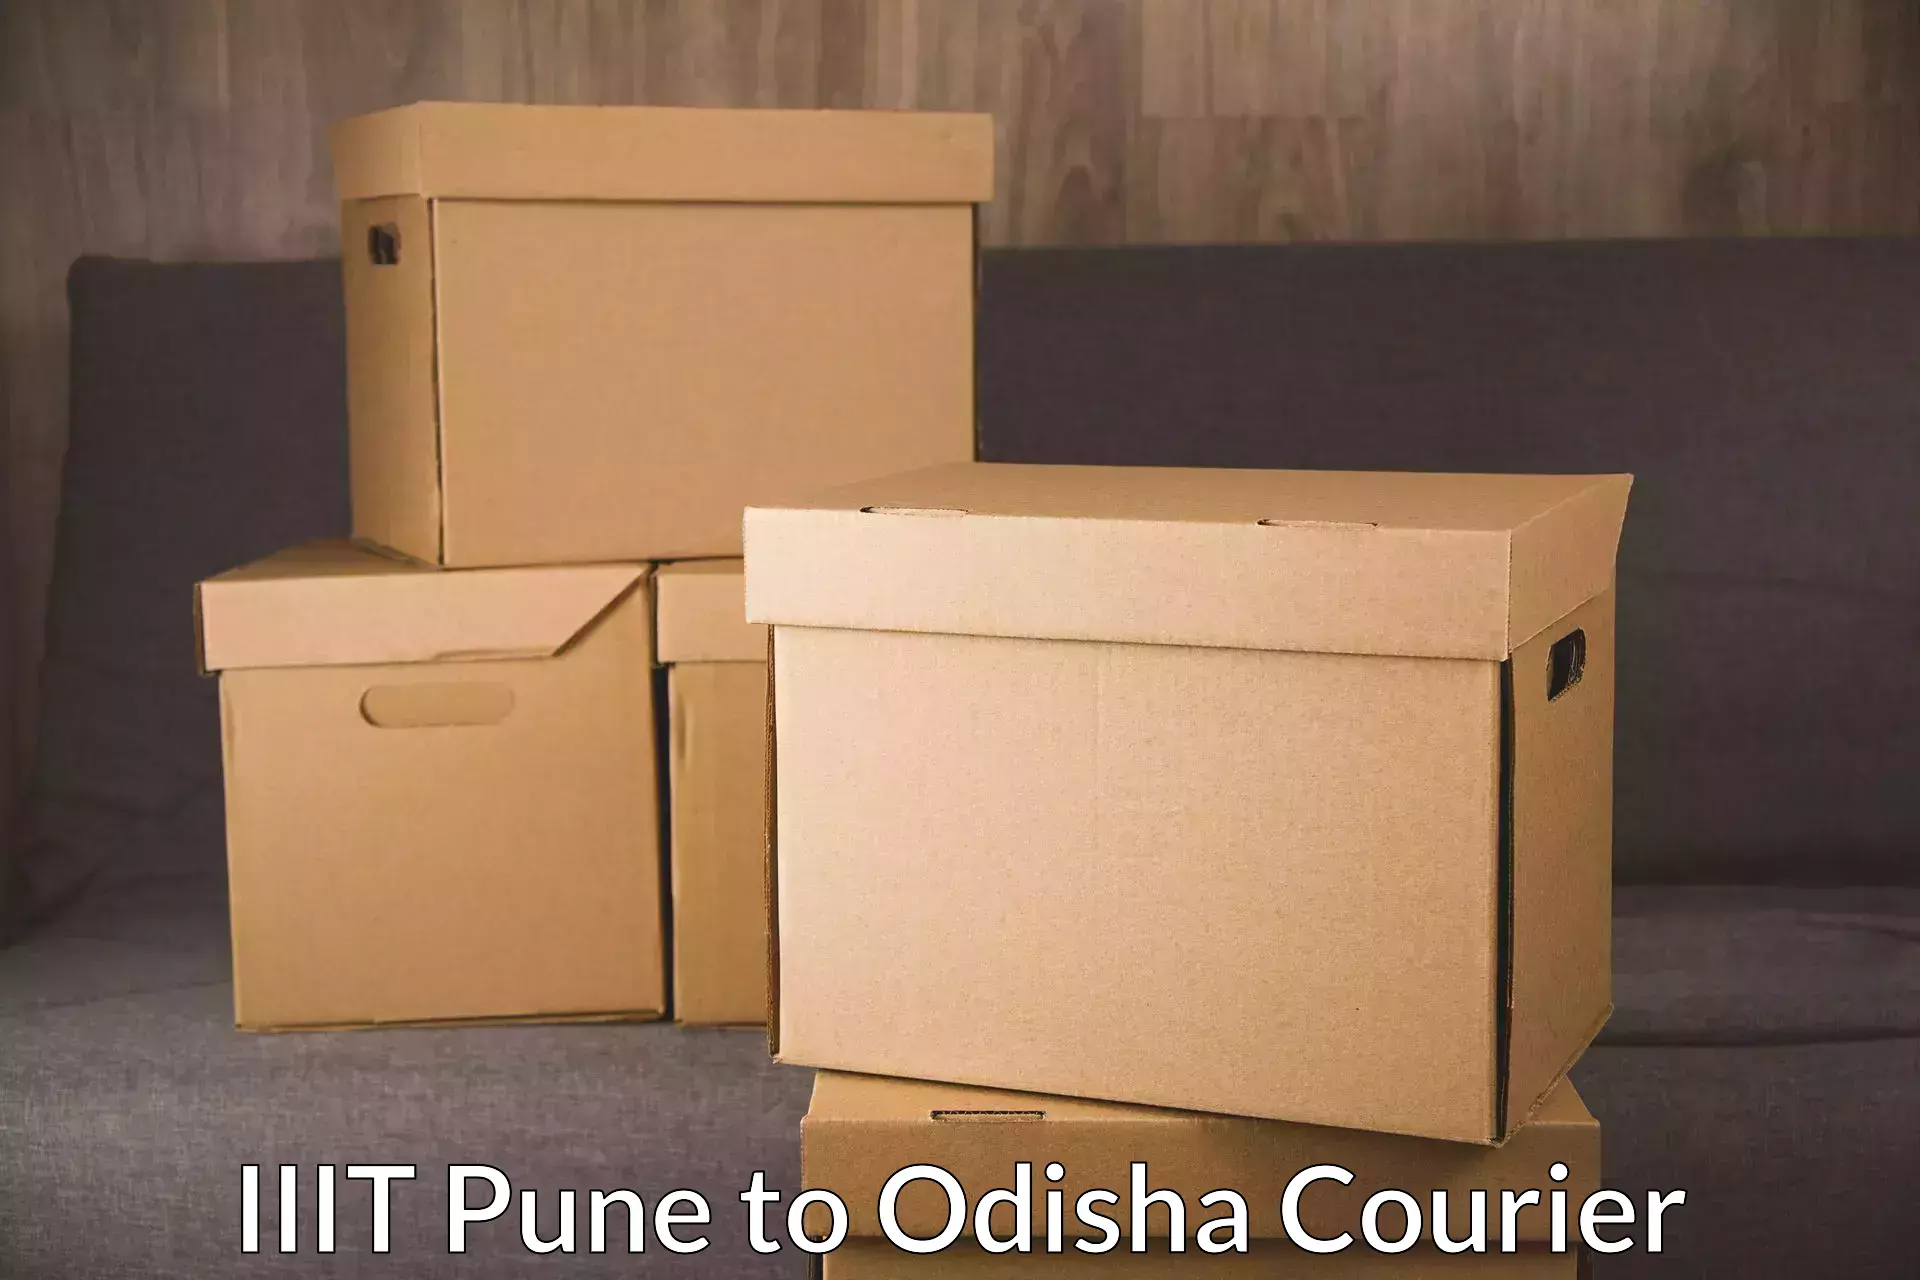 Overnight delivery services in IIIT Pune to Puri